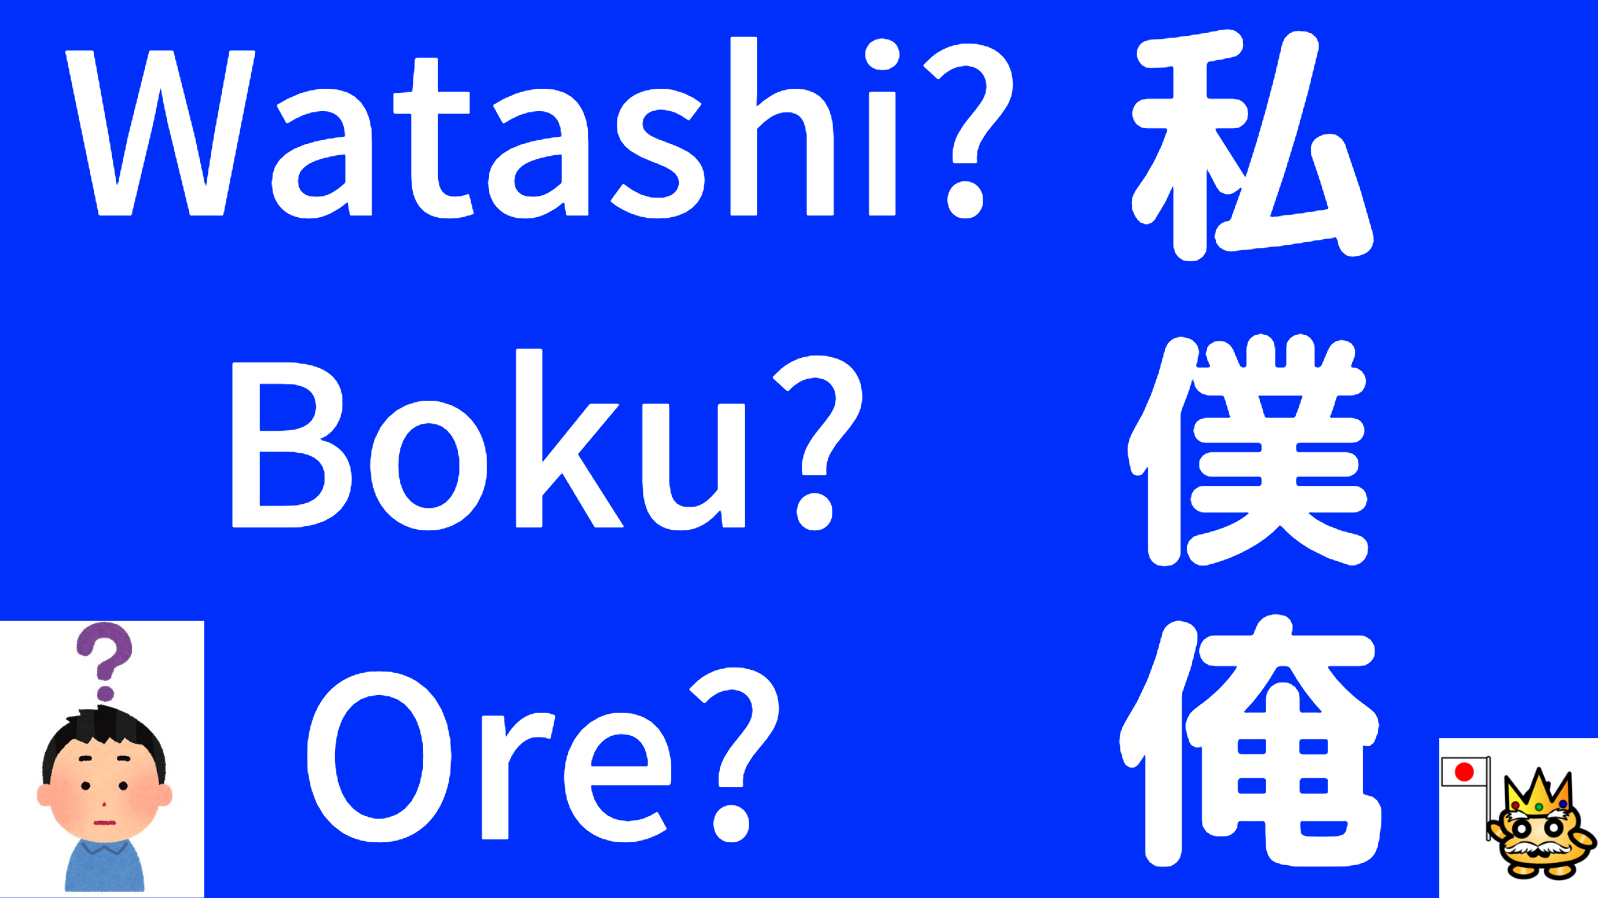 How to Talk about or Refer to Yourself in Japanese - Boku, Ore, Watashi